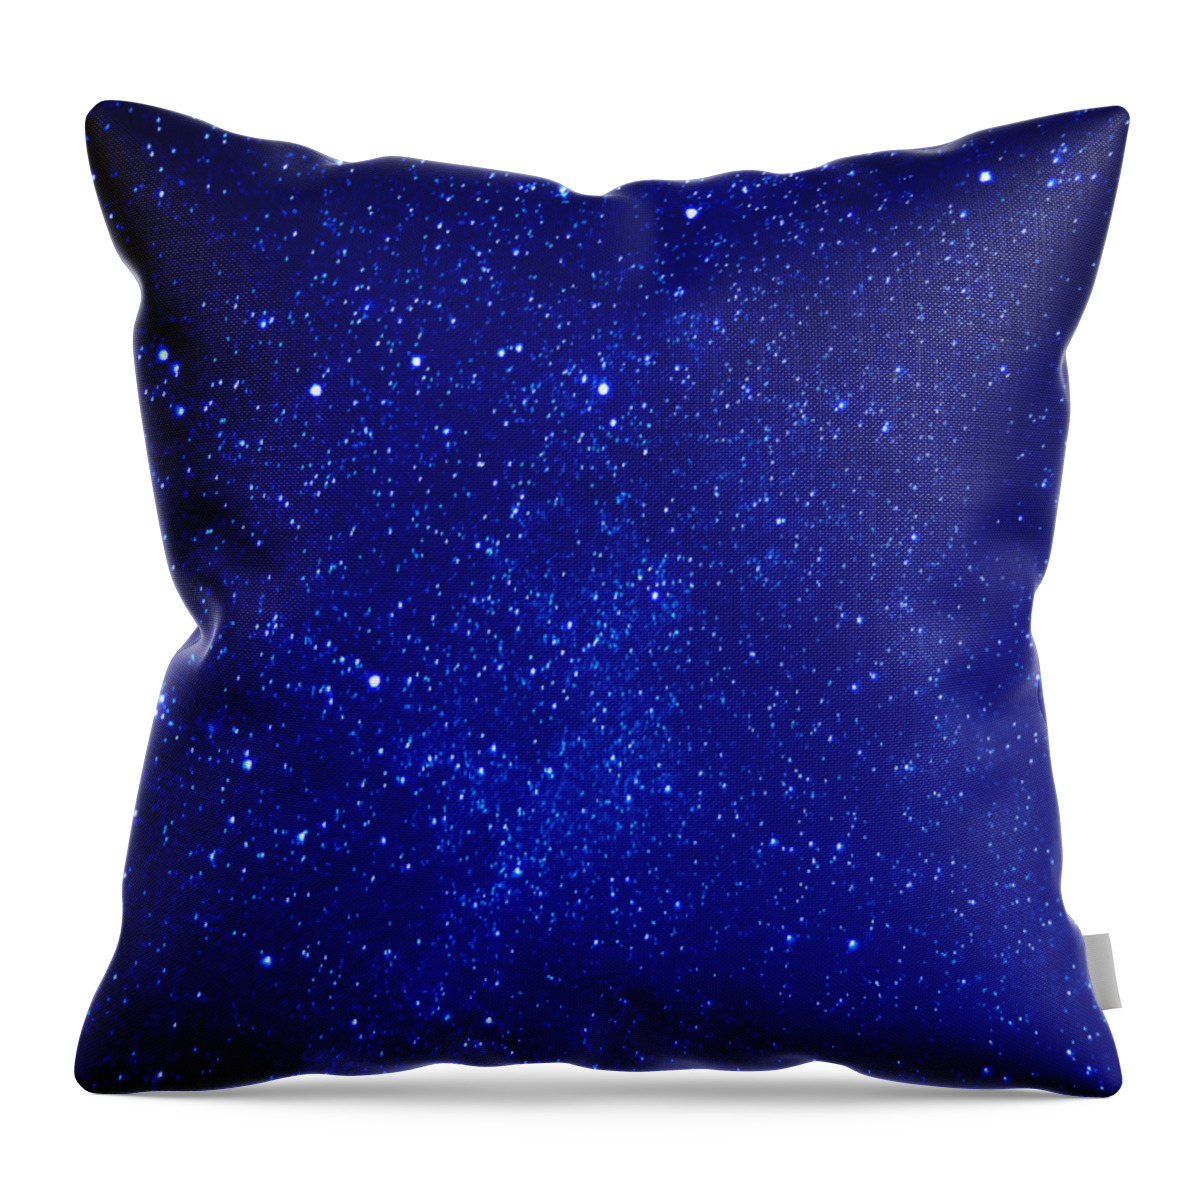 Night Throw Pillow featuring the photograph Constellation Cassiopeia by Thomas R Fletcher